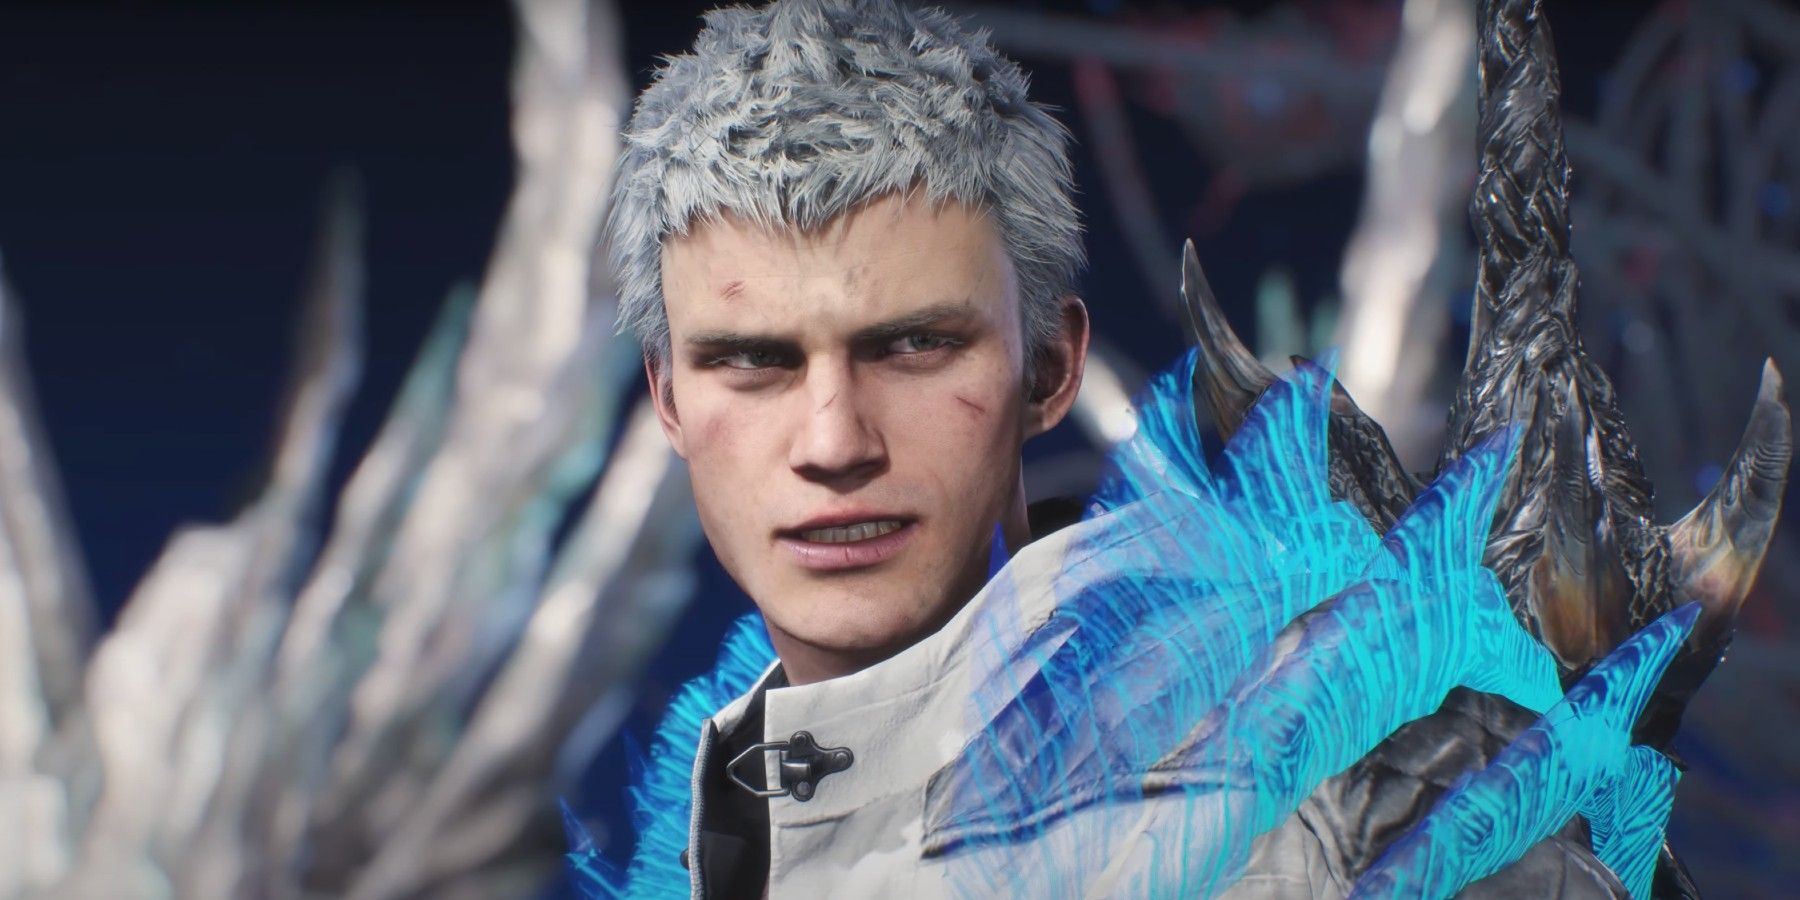 Vergil Devil May Cry in 2023  Devil may cry, Vergil dmc, Crying